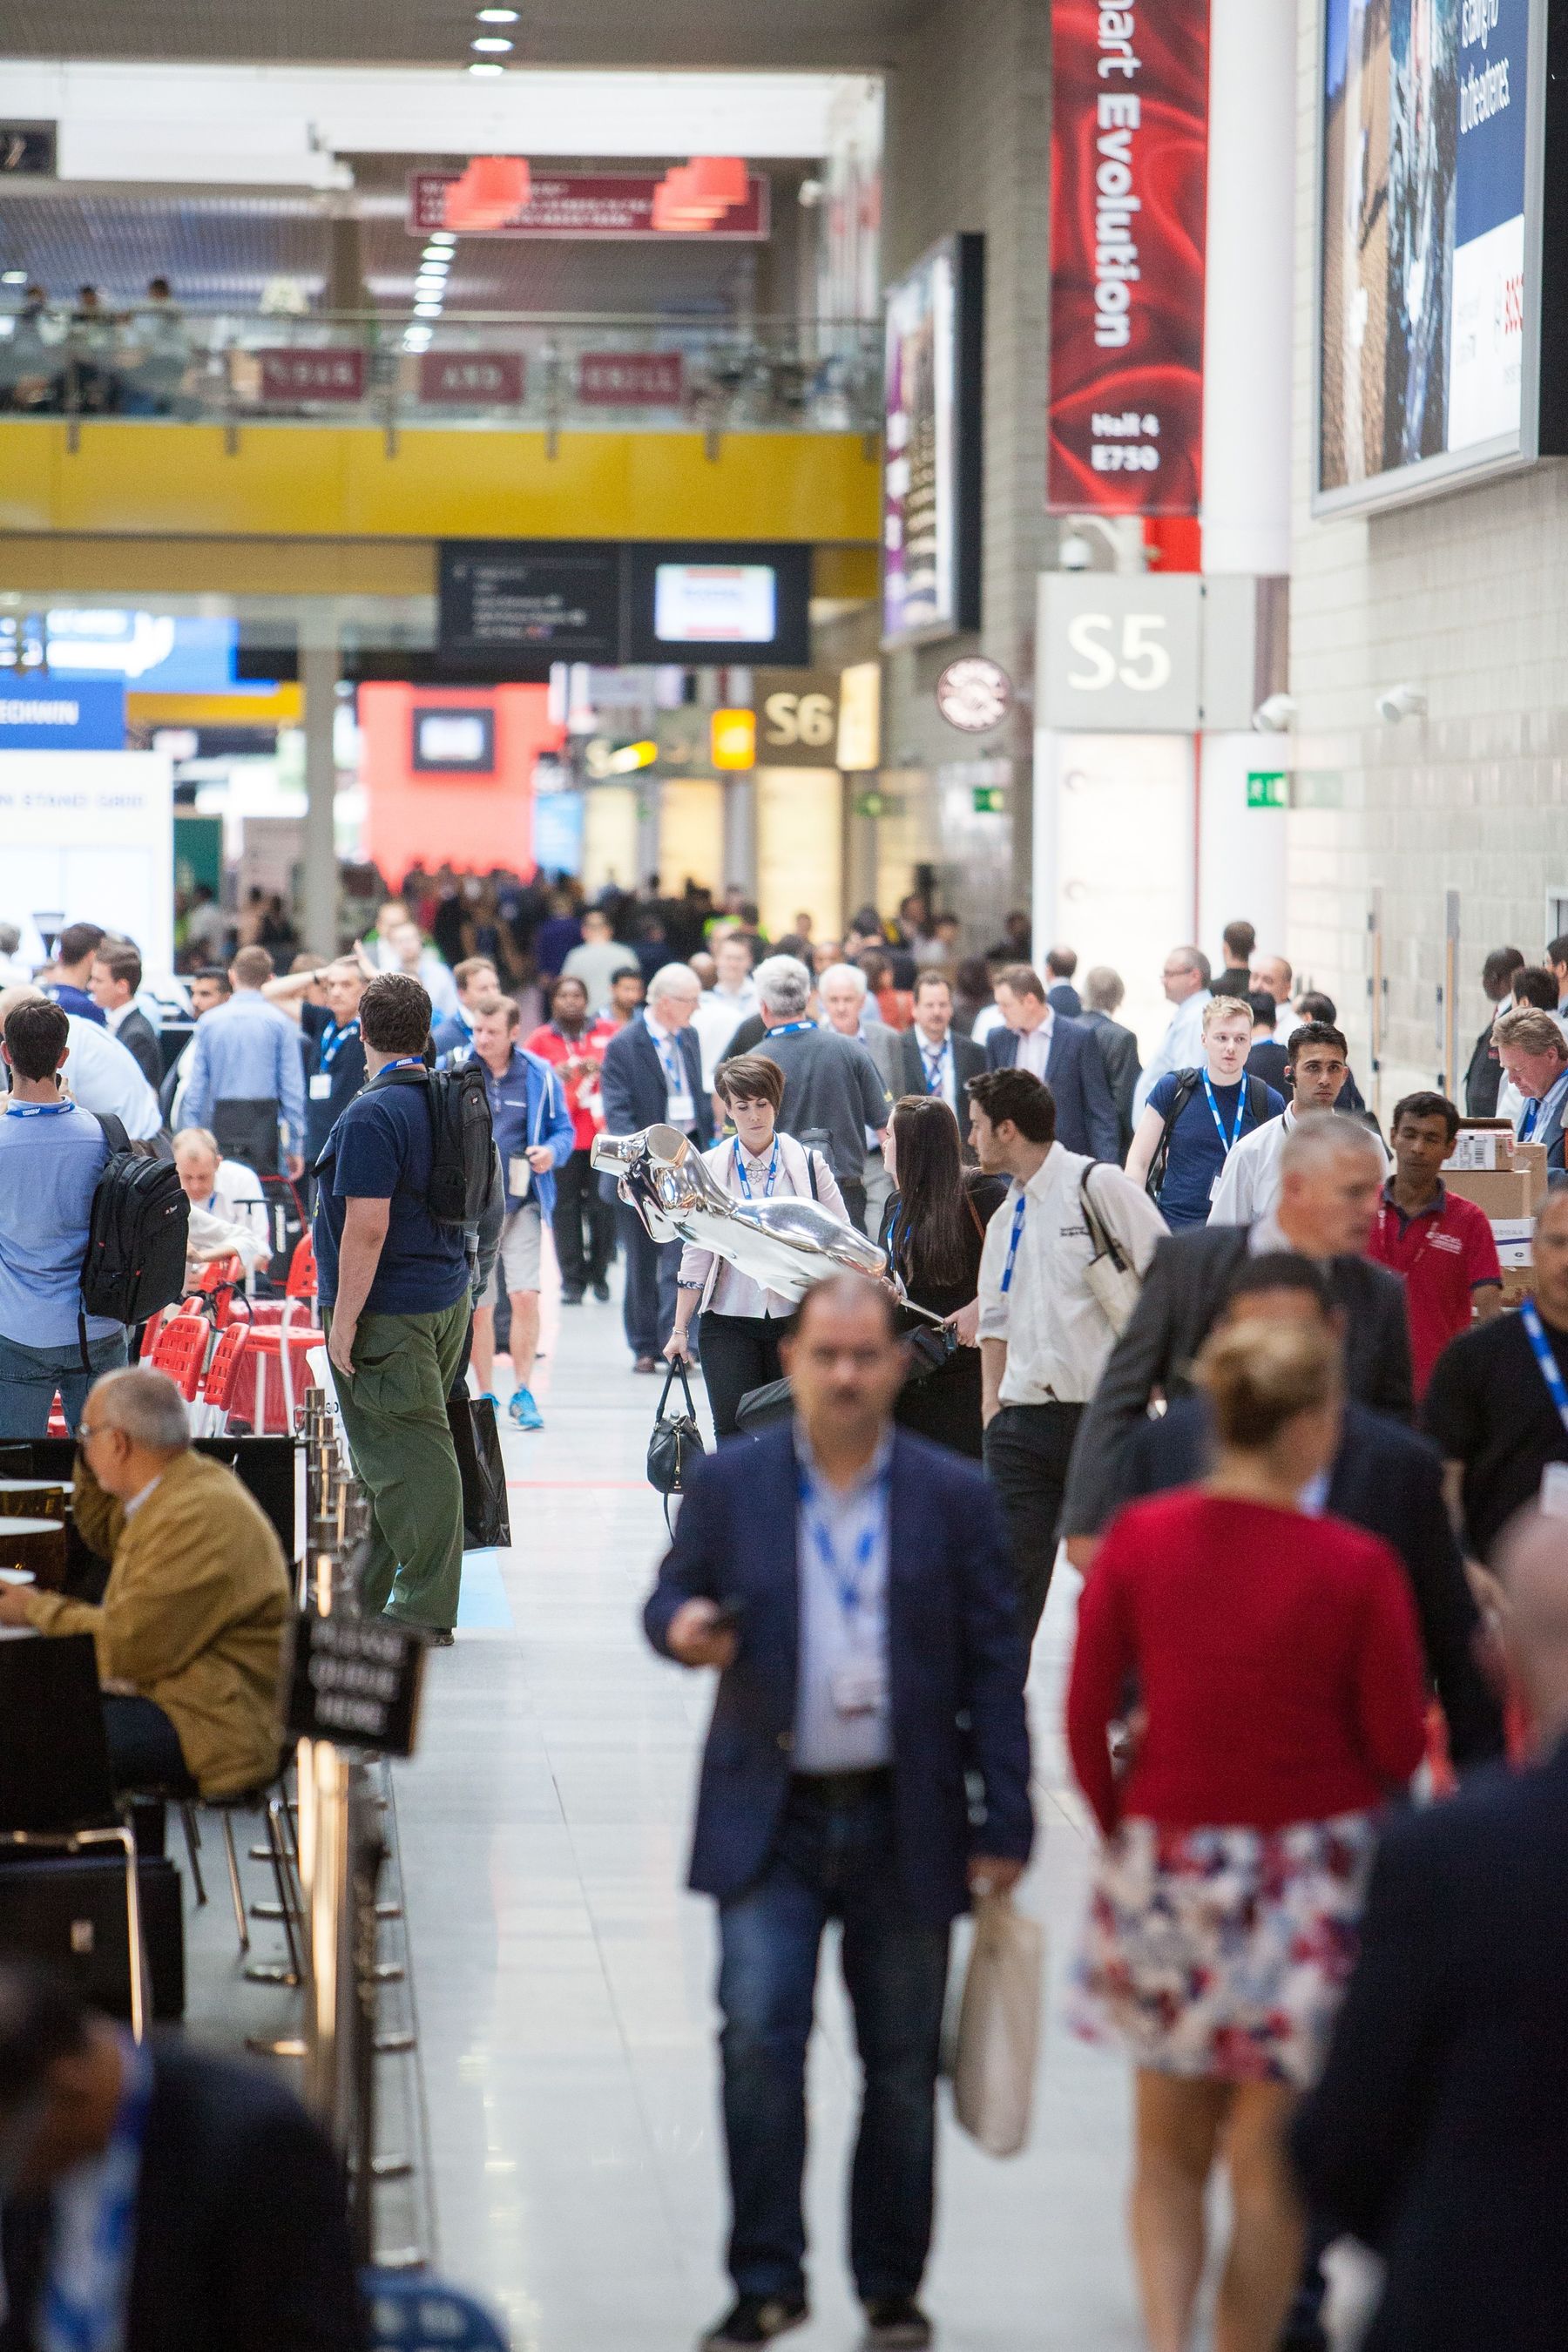 Over 10,000 people attended Facilities Show 2014 at London ExCeL. Organisers say plans for 2015 are fast gaining momentum. (PRNewsFoto/UBM Live)